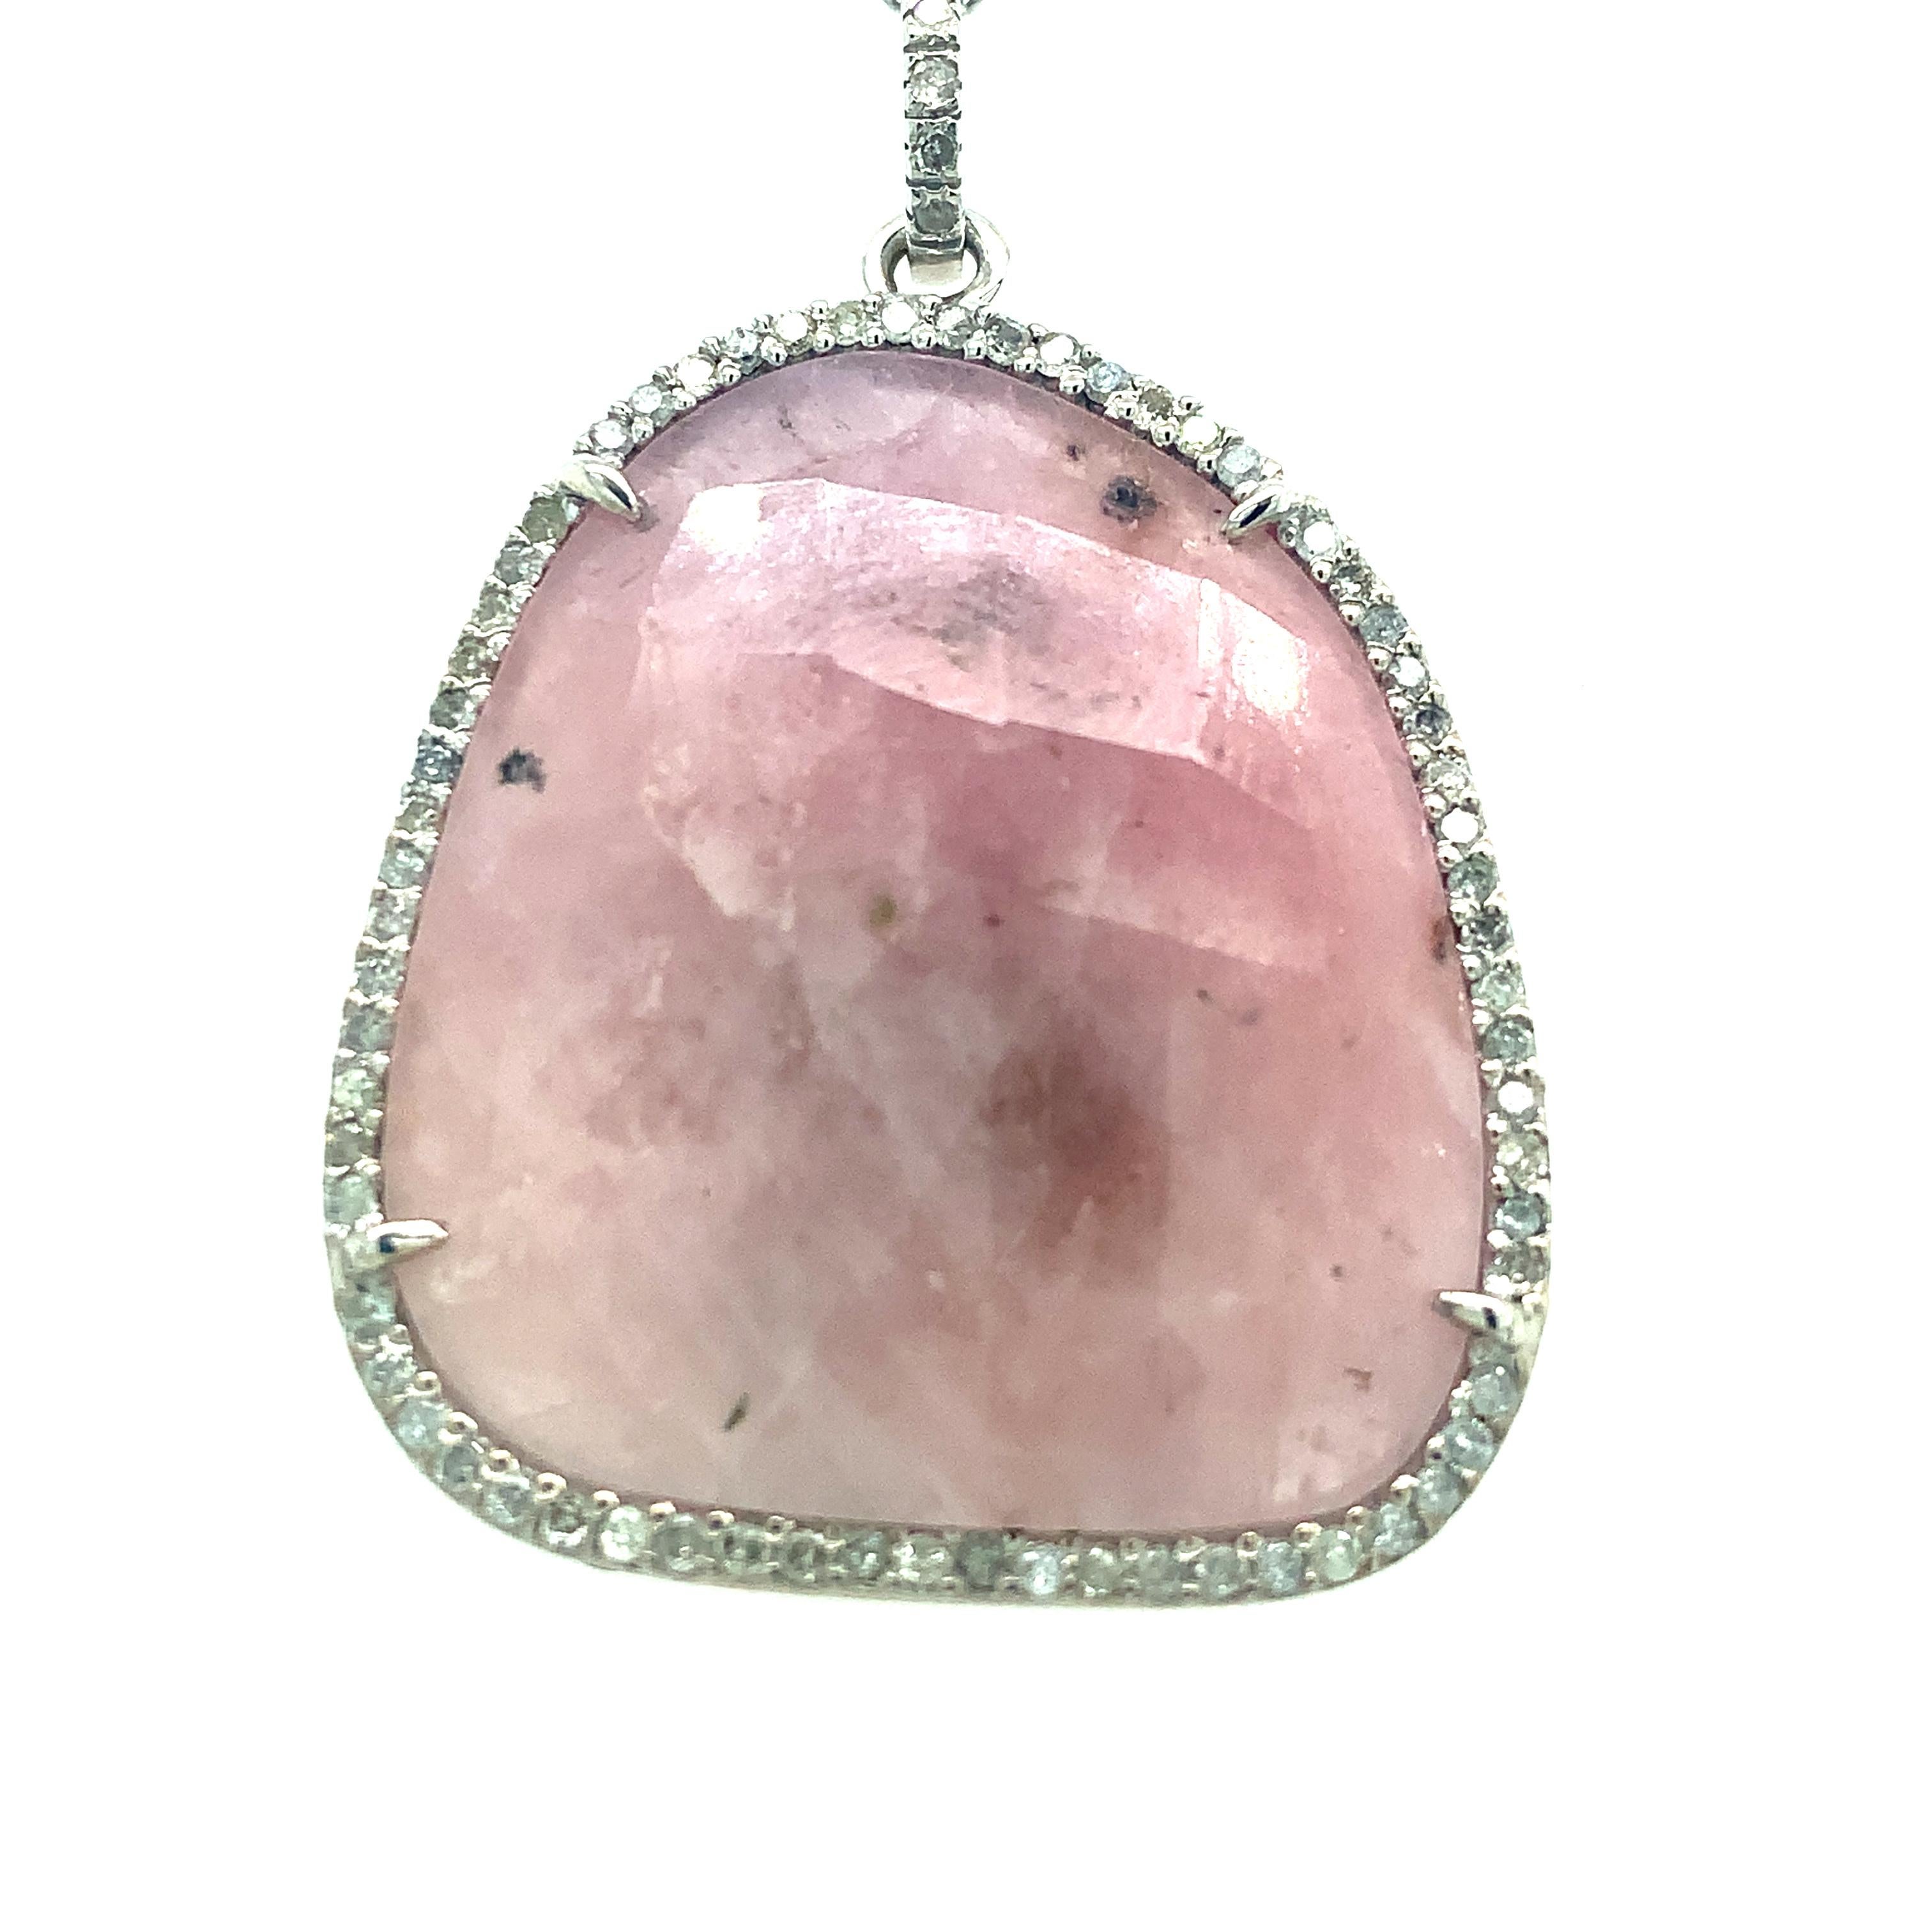 Color Jewelry

Pink Sapphire surrounded by Diamonds in 18K white gold.

Pink Sapphire: 24.49ct total weight.
Diamonds: 0.53ct total weight.
